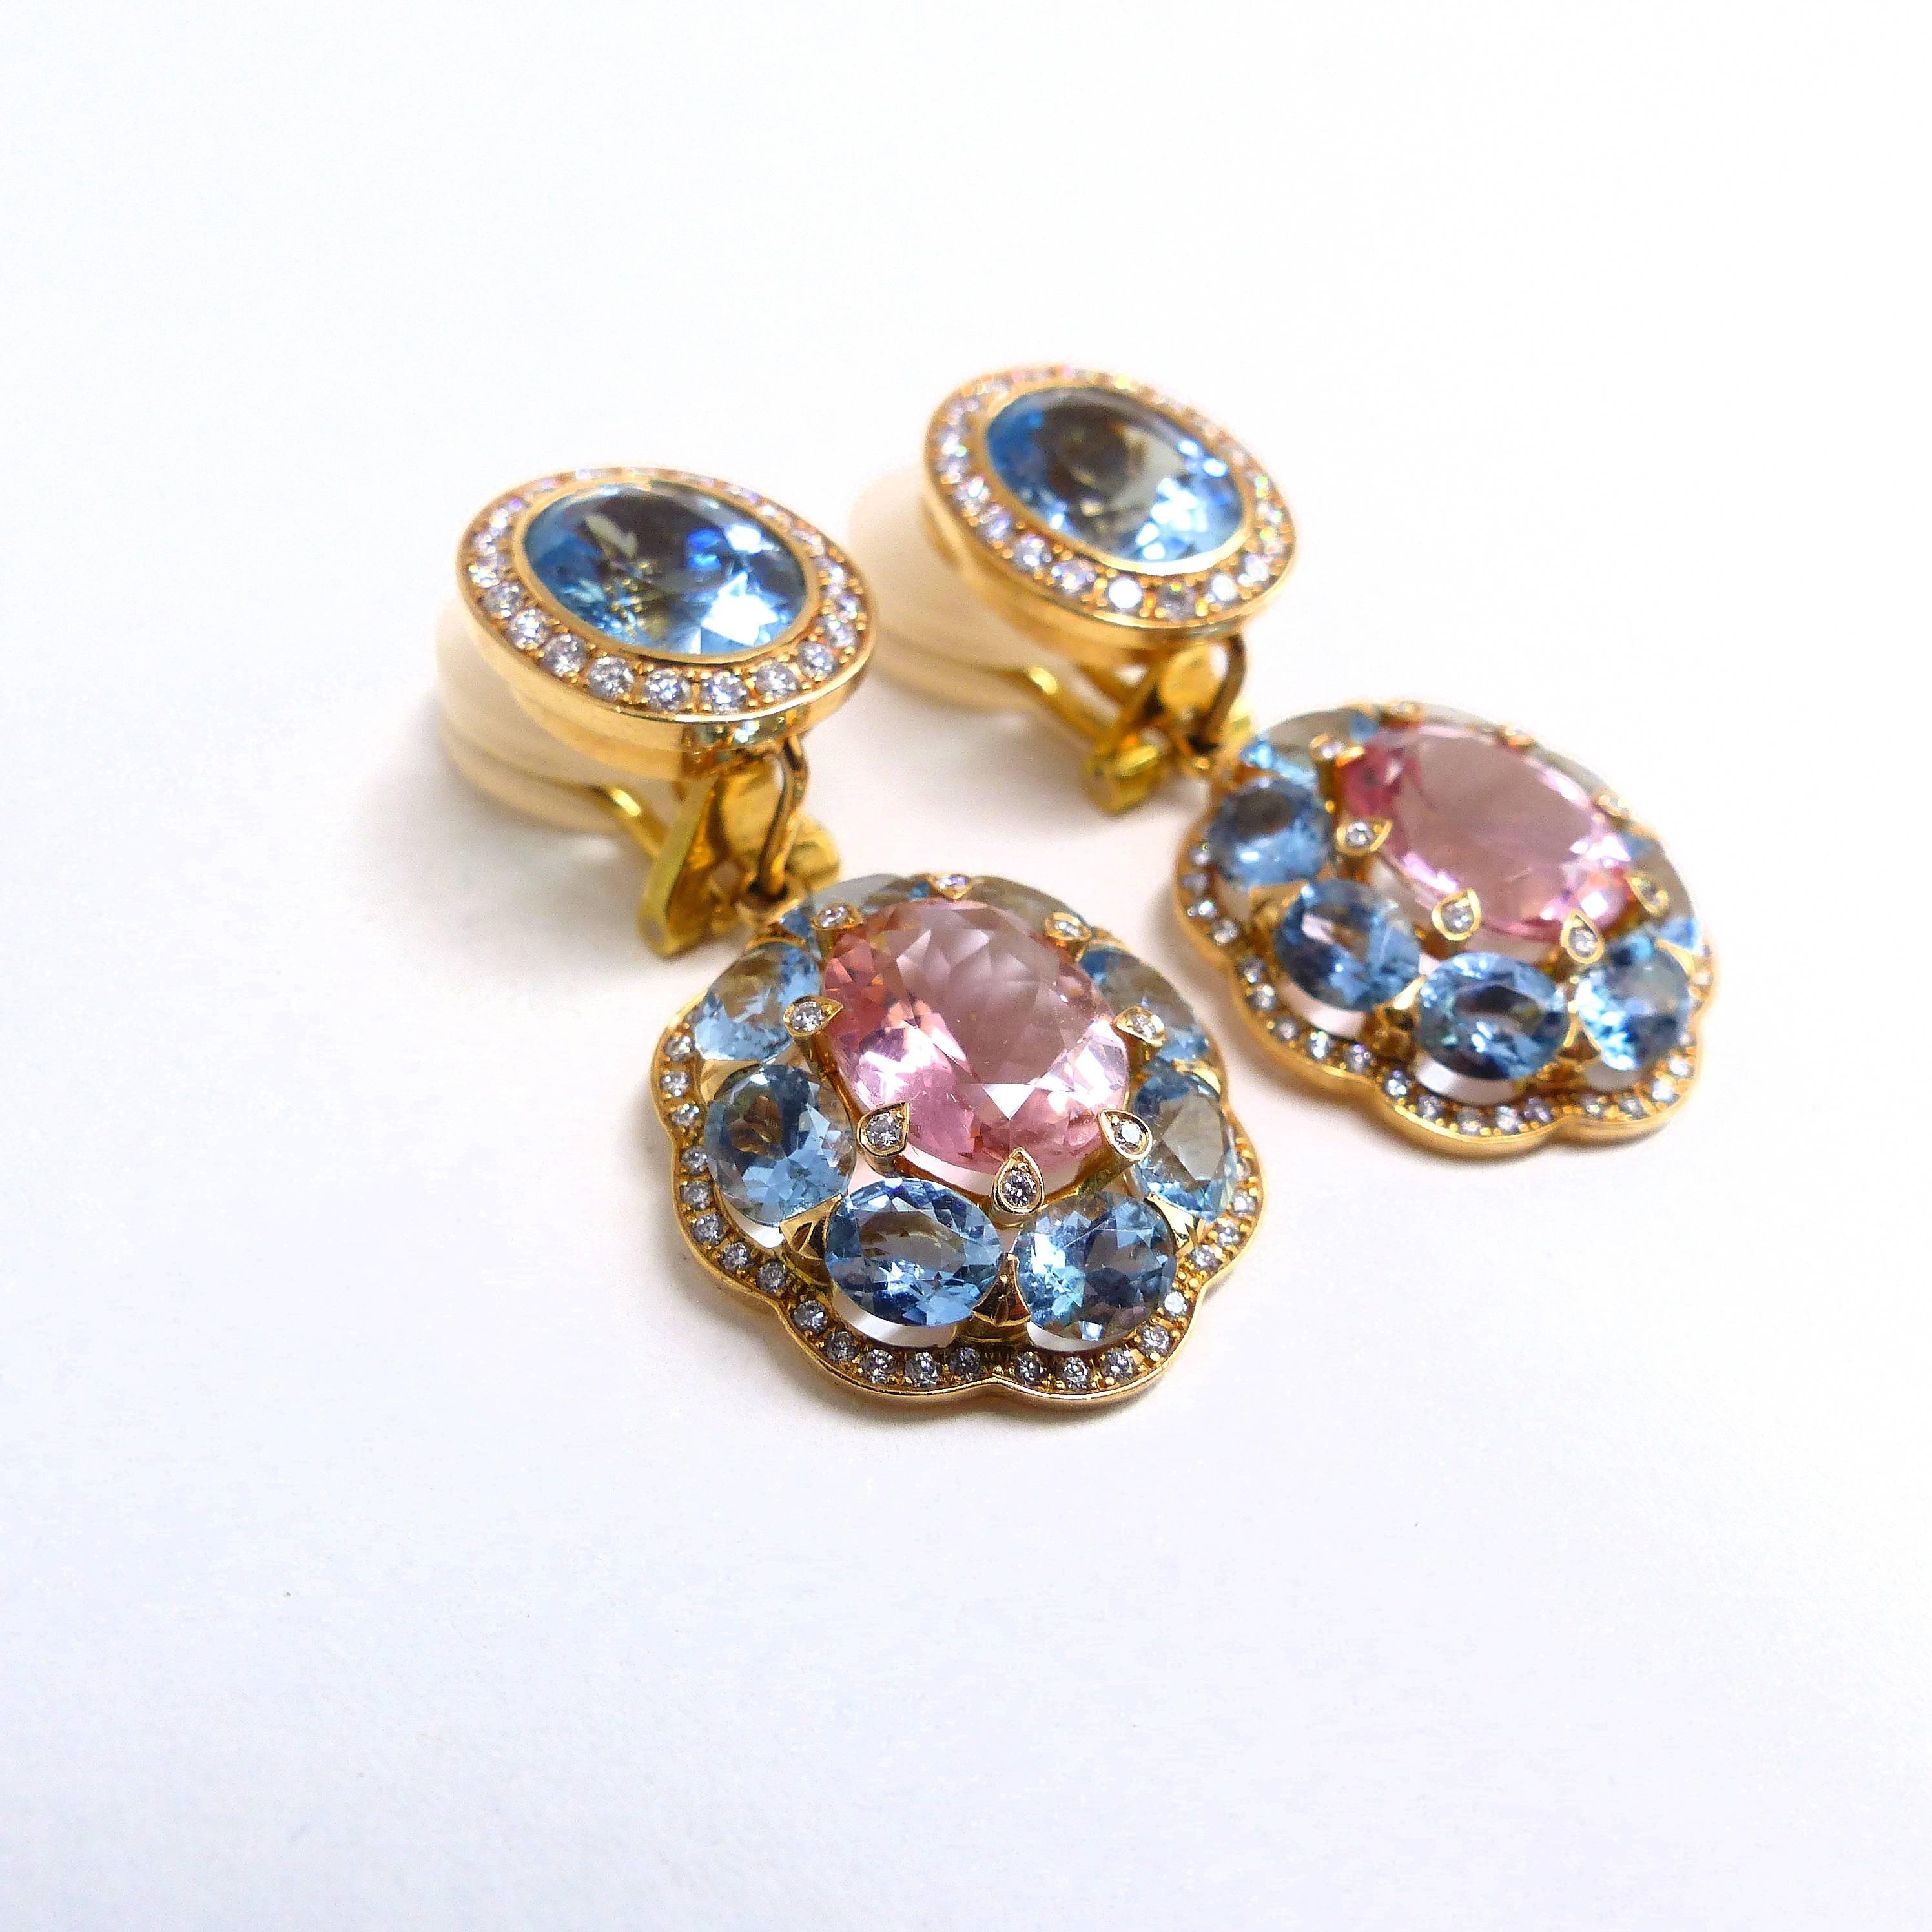 Thomas Leyser is renowned for his contemporary jewellery designs utilizing fine gemstones. 

This 18k rose gold (17.52g) pair of earrings is set with 2x fine pink Tourmalines (facetted, oval, 10x8mm, 4.84ct) + 16x Aquamarines (facetted, oval, 5x4mm,